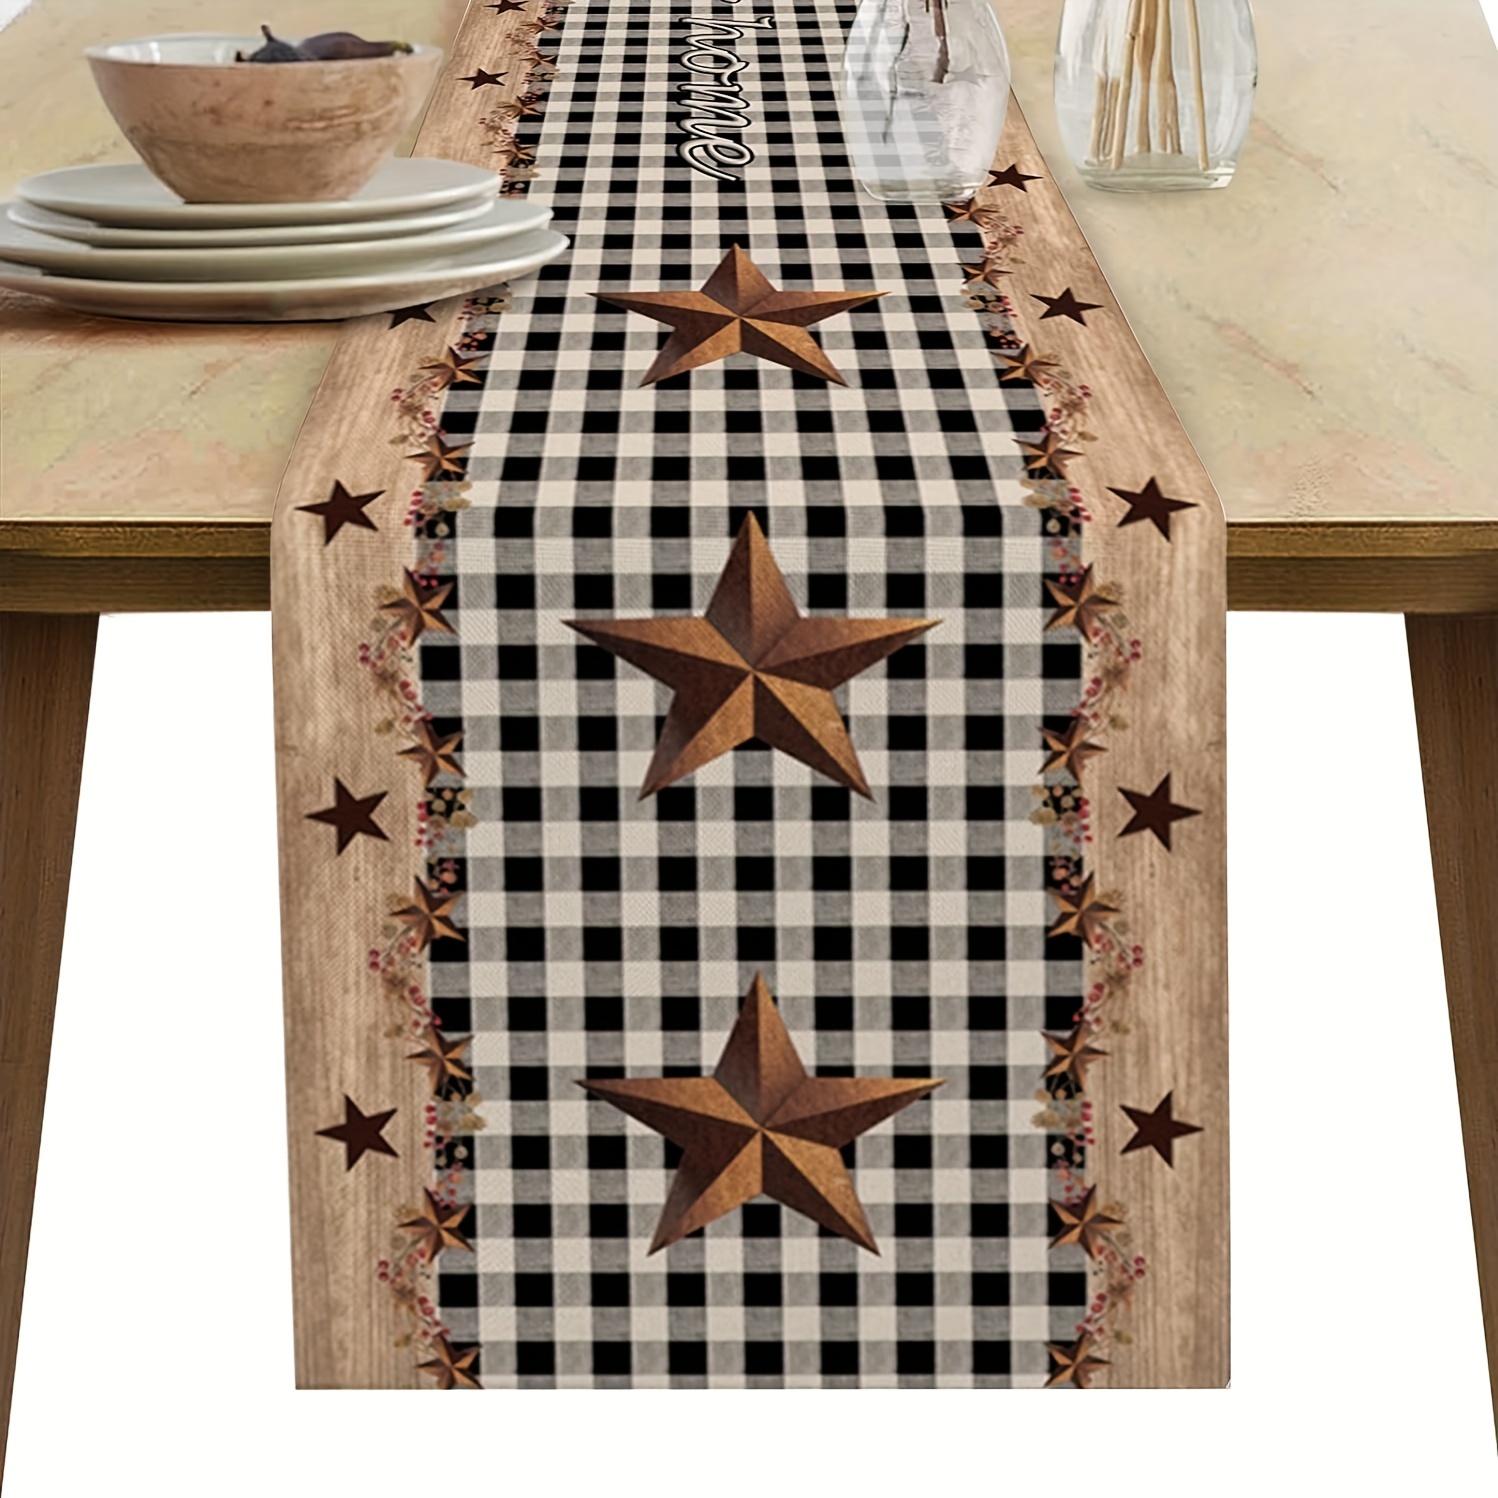 

Polyester Knit Fabric Table Runner - Farmhouse Style Vintage Country Star Black Plaid - Decorative Rectangle Dining Cloth For Dinner Party, Wedding, Home Decor - 1pc